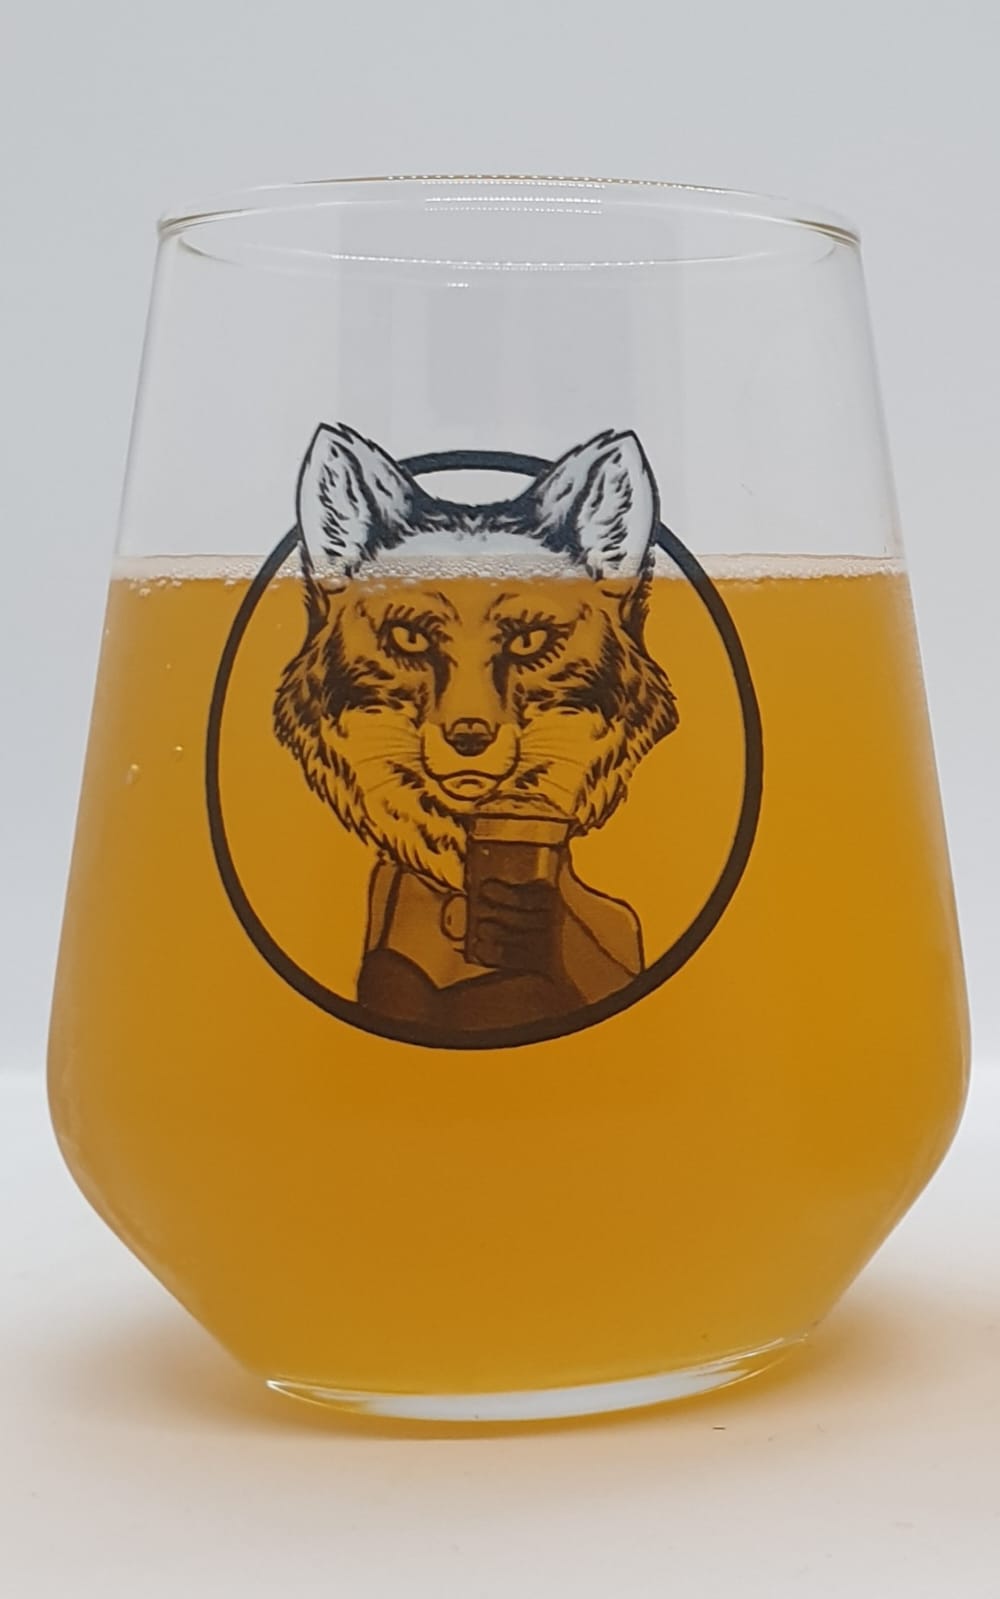 Fox & Badger / His & Hers Beer Tumbler Glass - Perfect Gift Idea for Boyfriend / Girlfriend